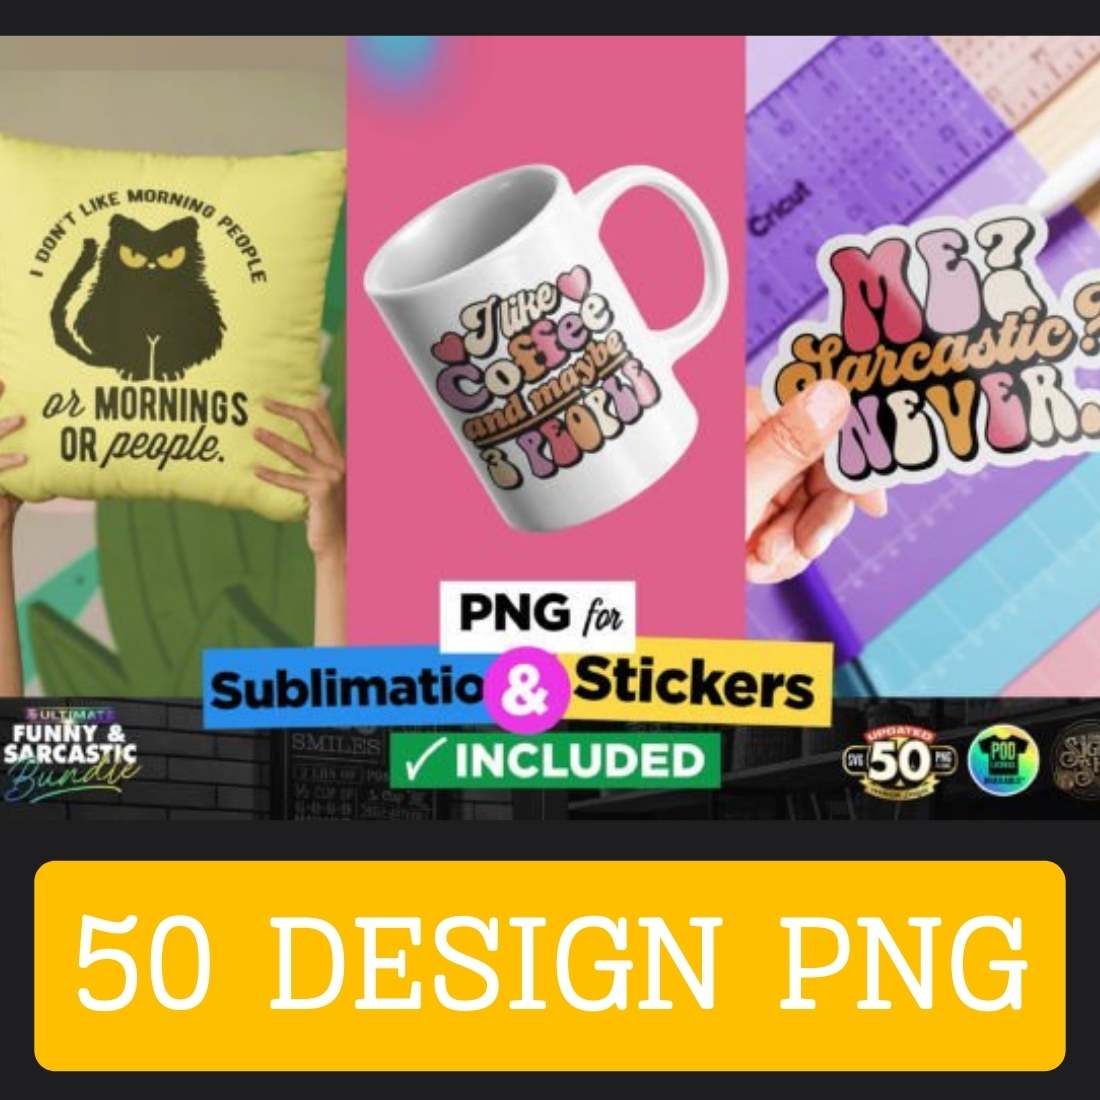 50 designs ready to print preview image.